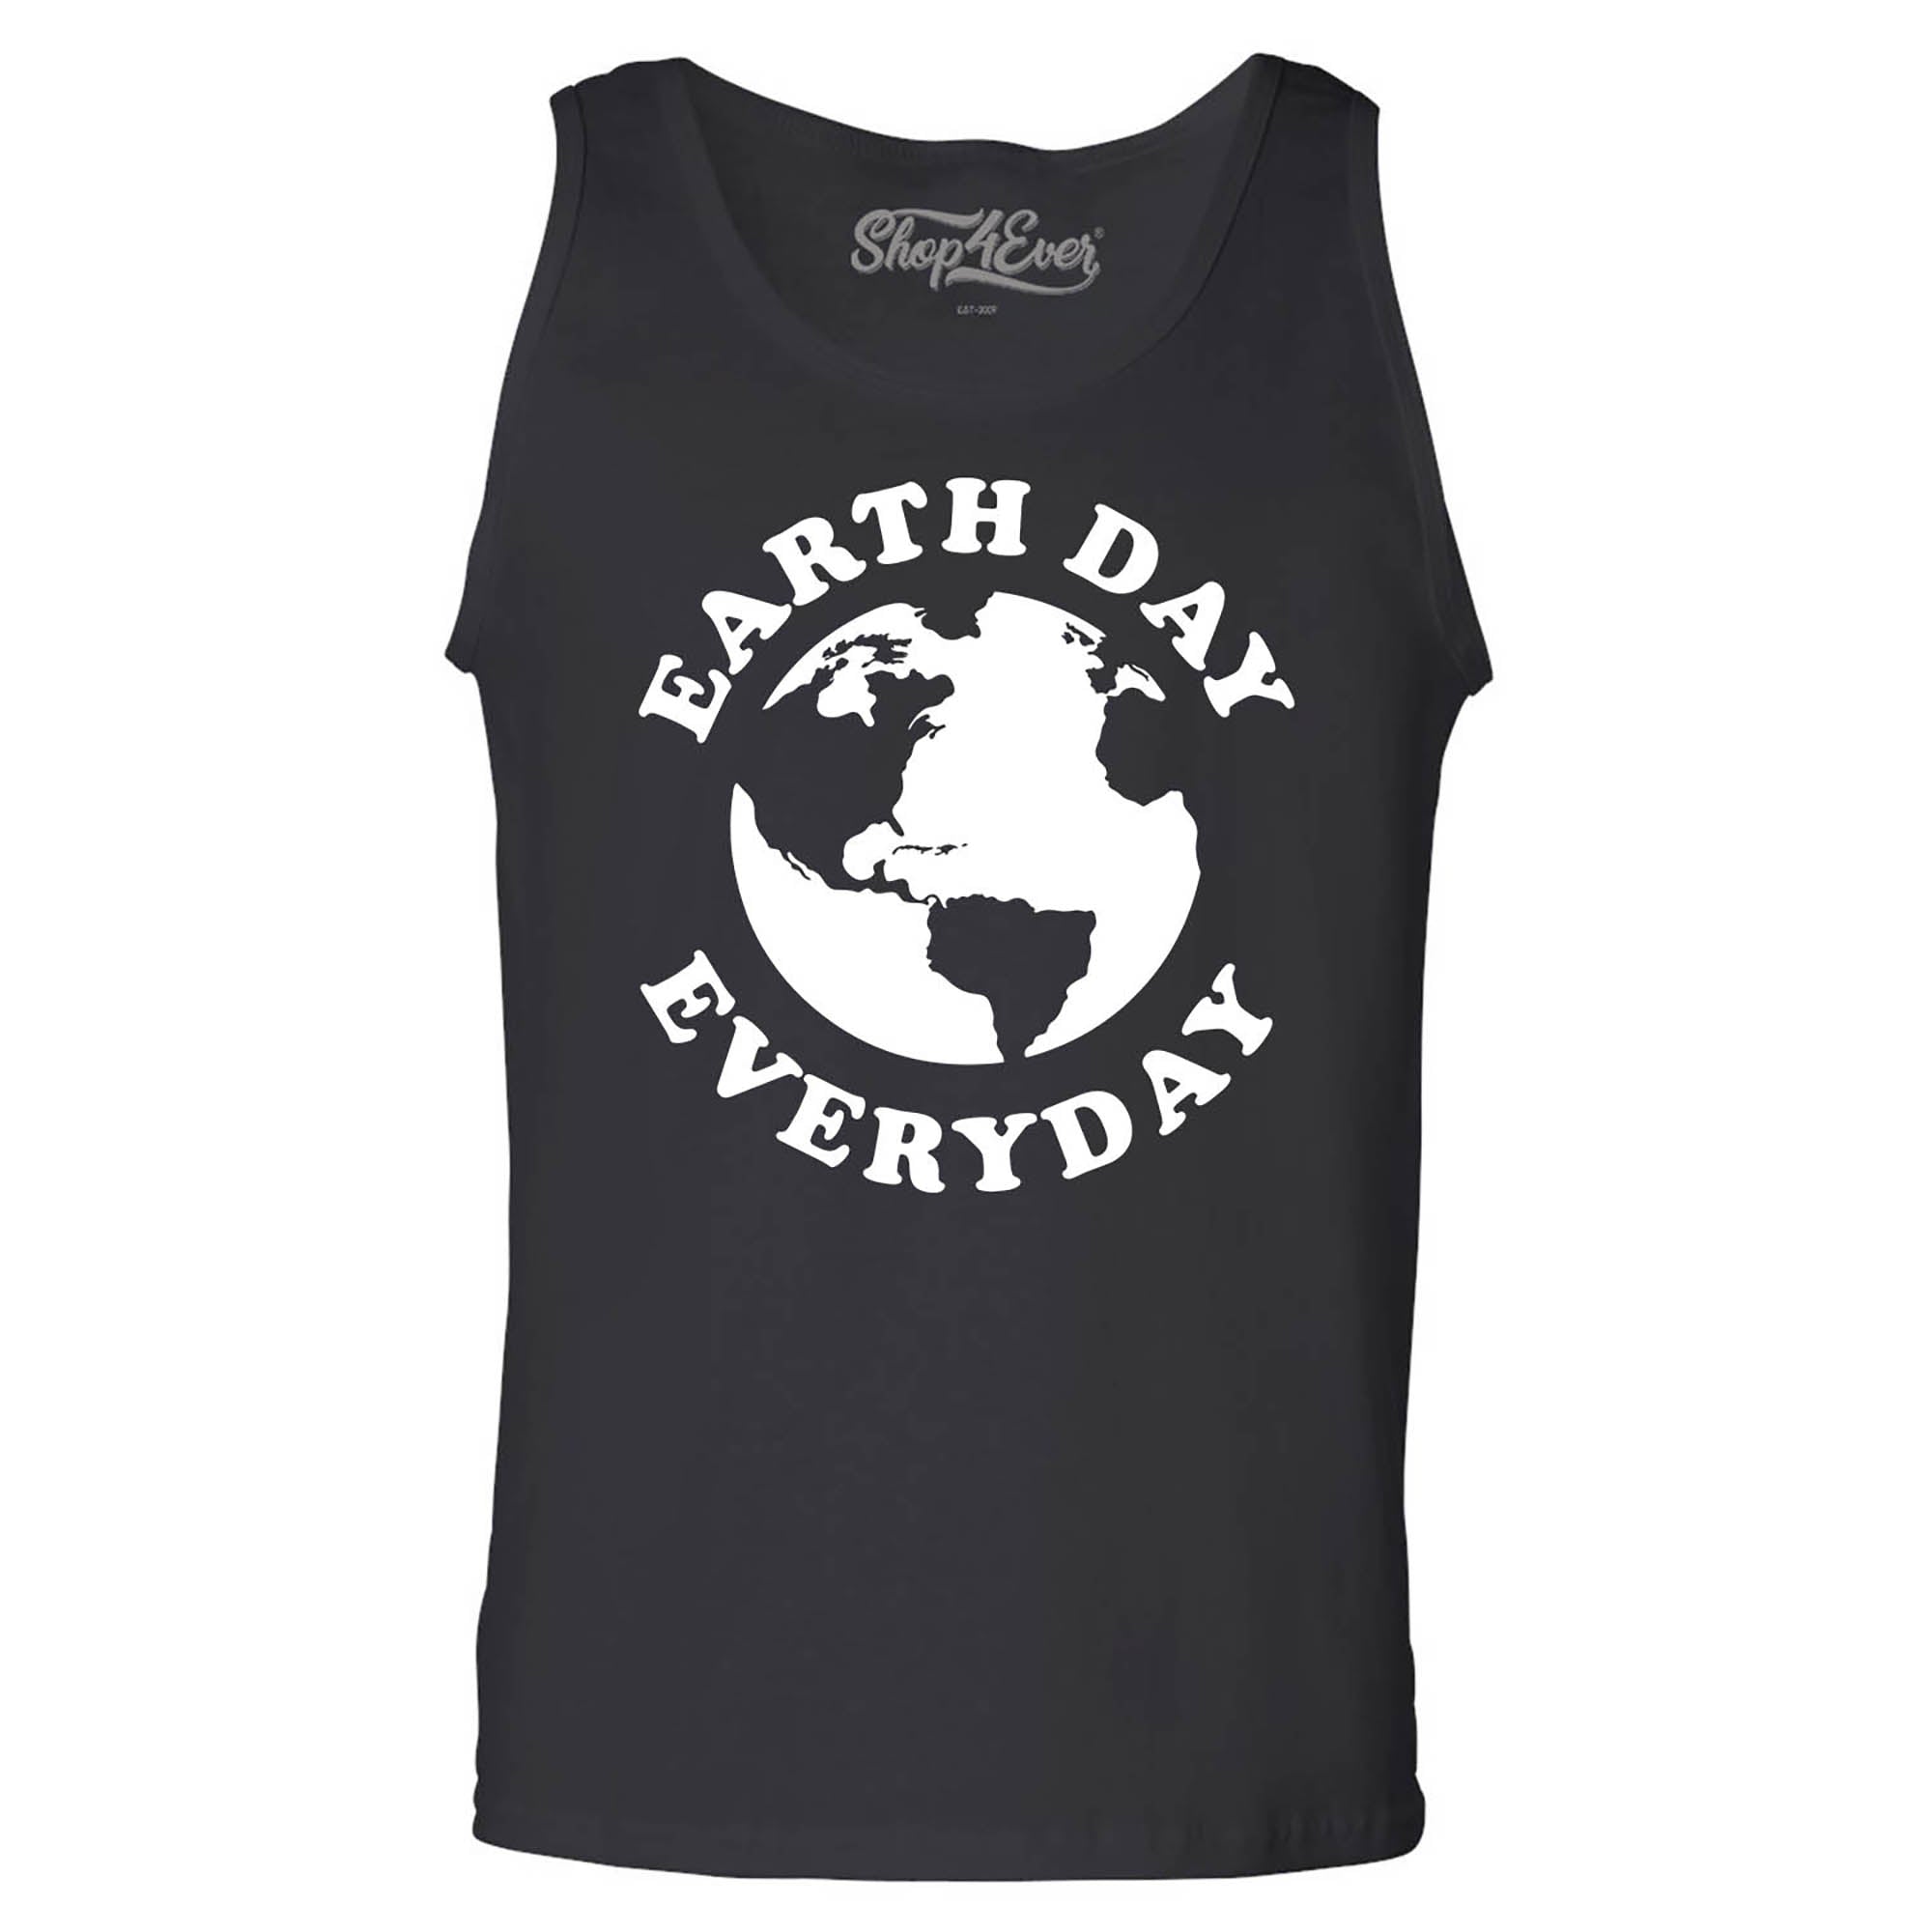 Earth Day Everyday Men's Tank Top